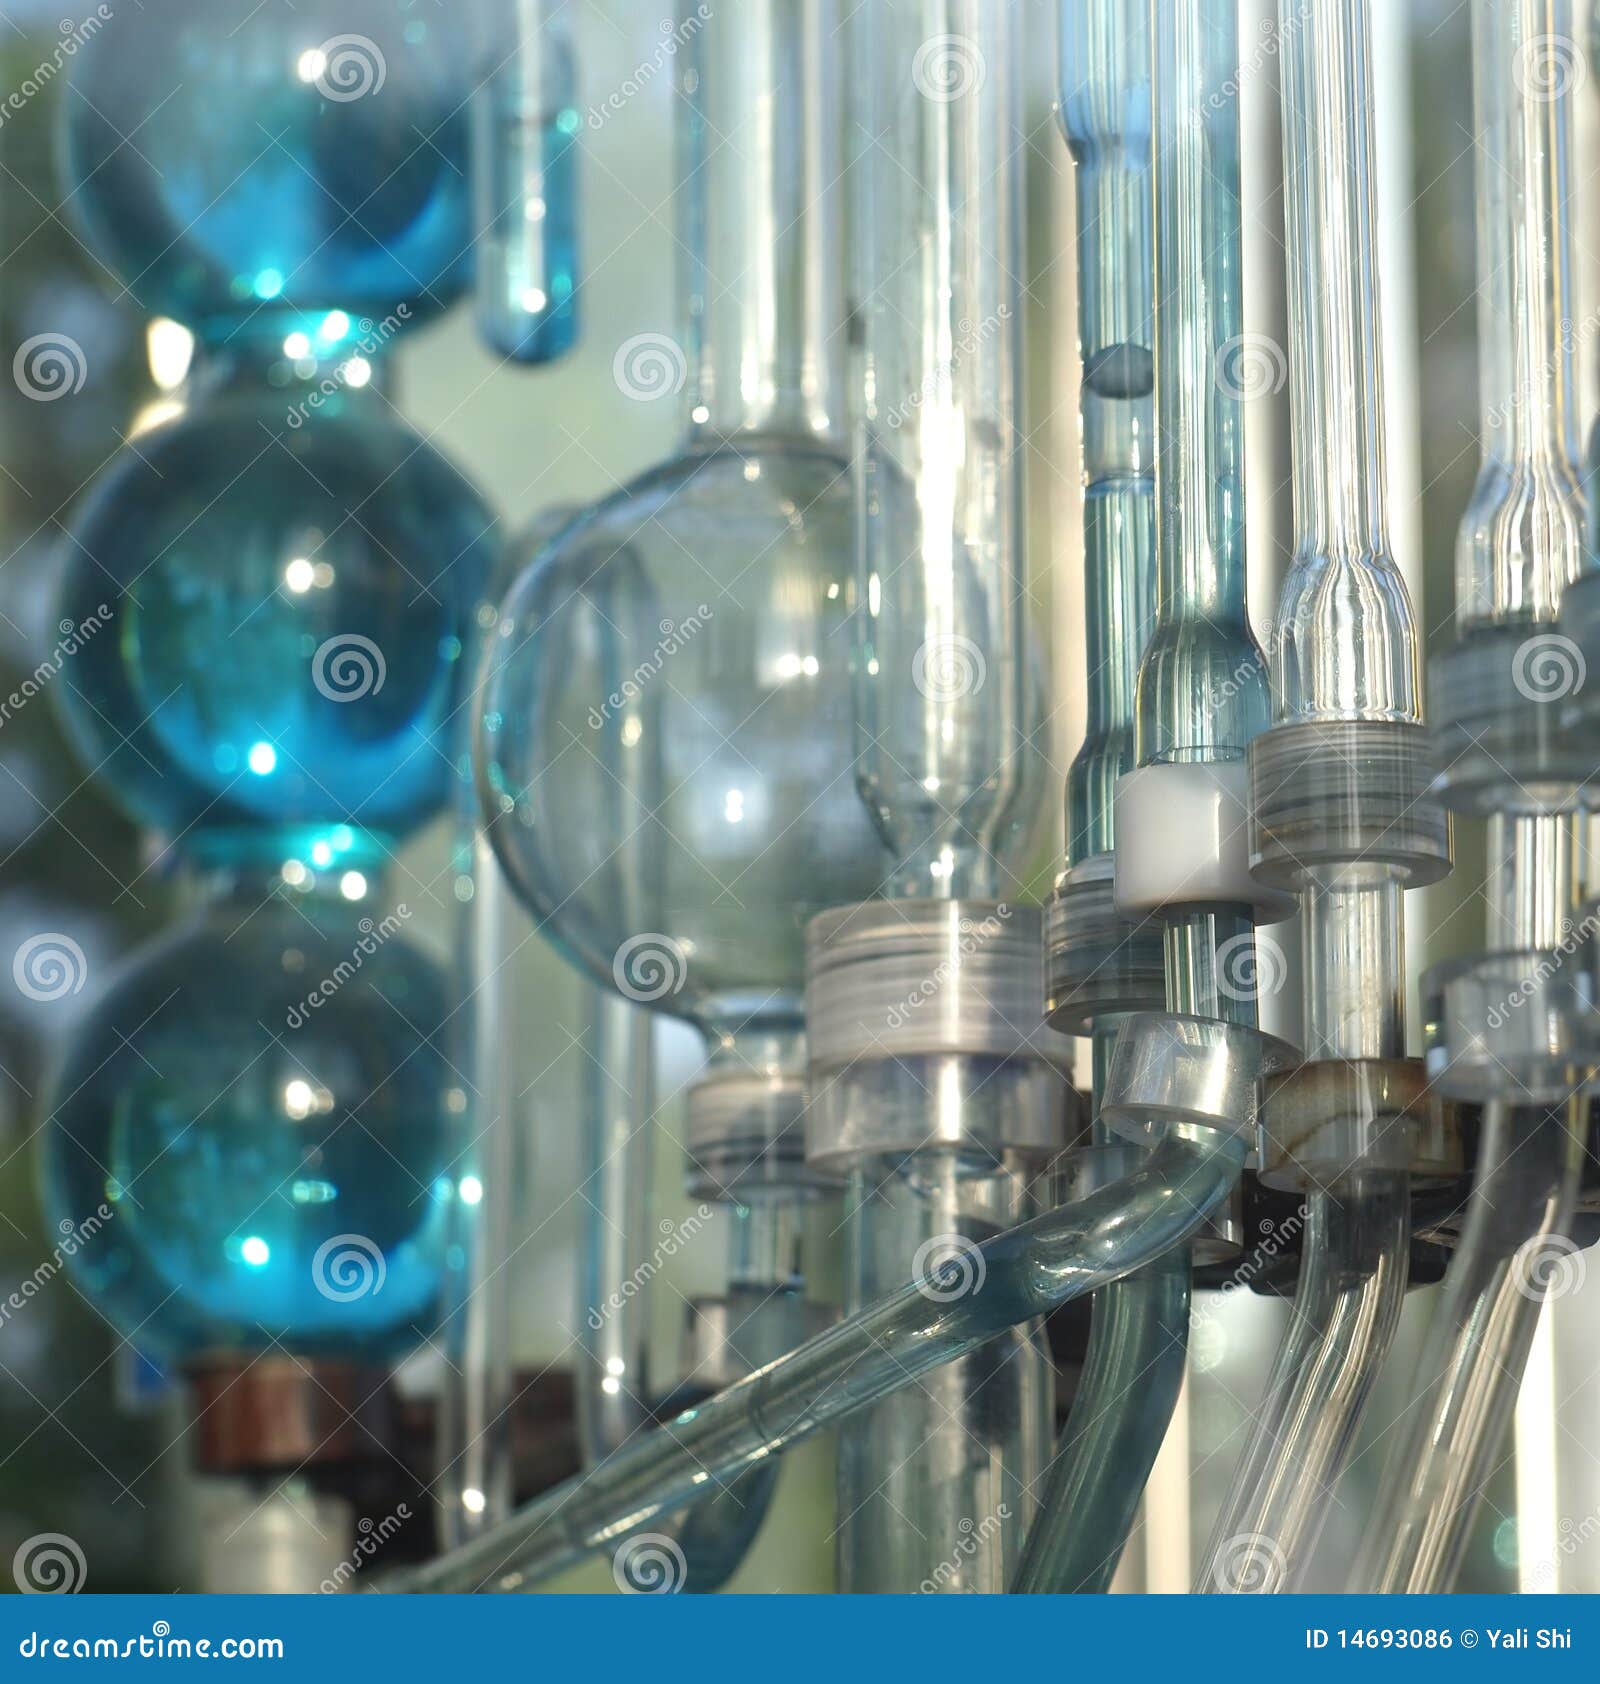 Chemical Glassware stock photo. Image of connected, tubes - 14693086